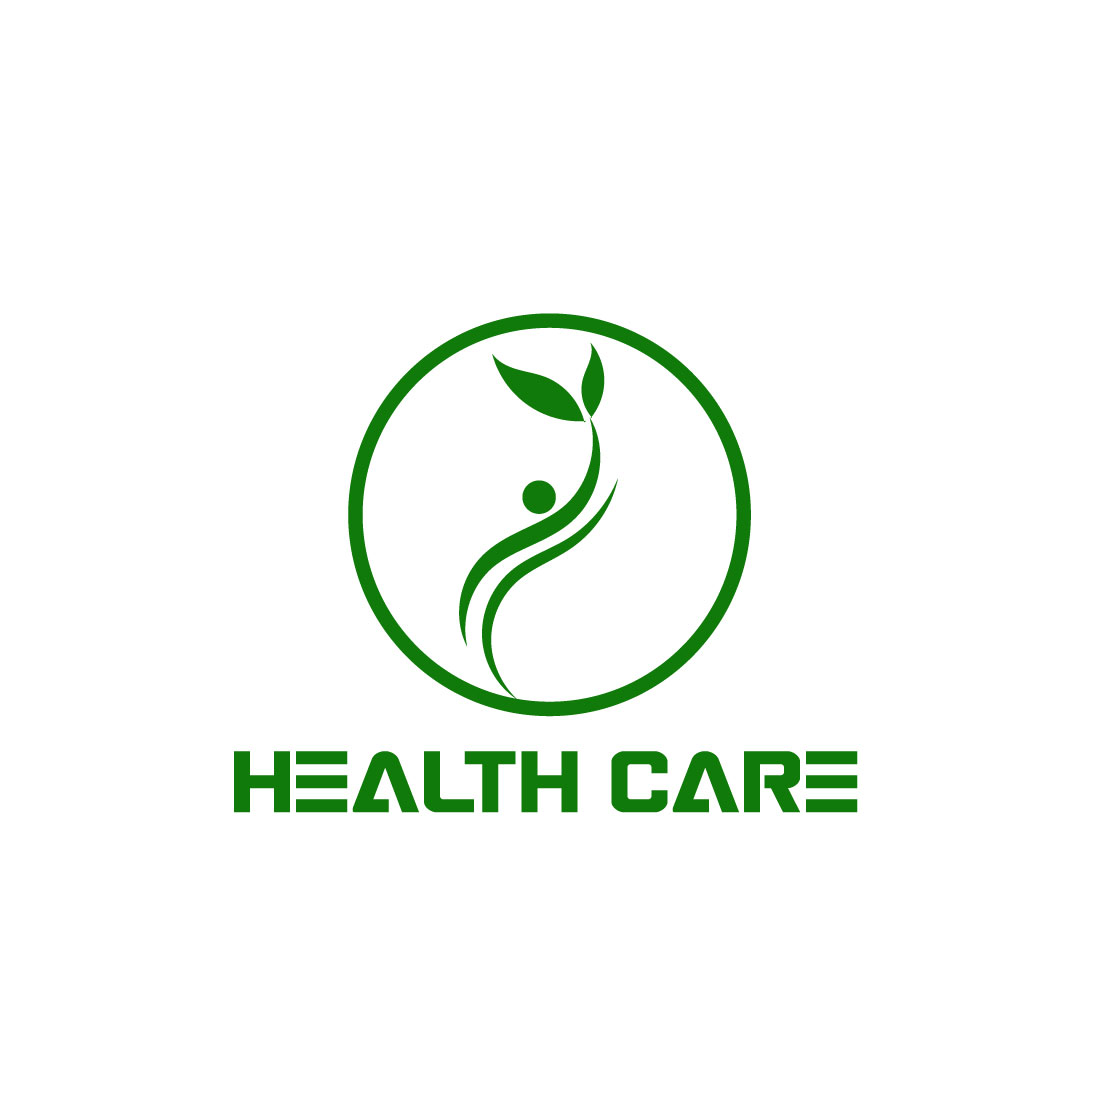 Free People Health care Logo cover image.